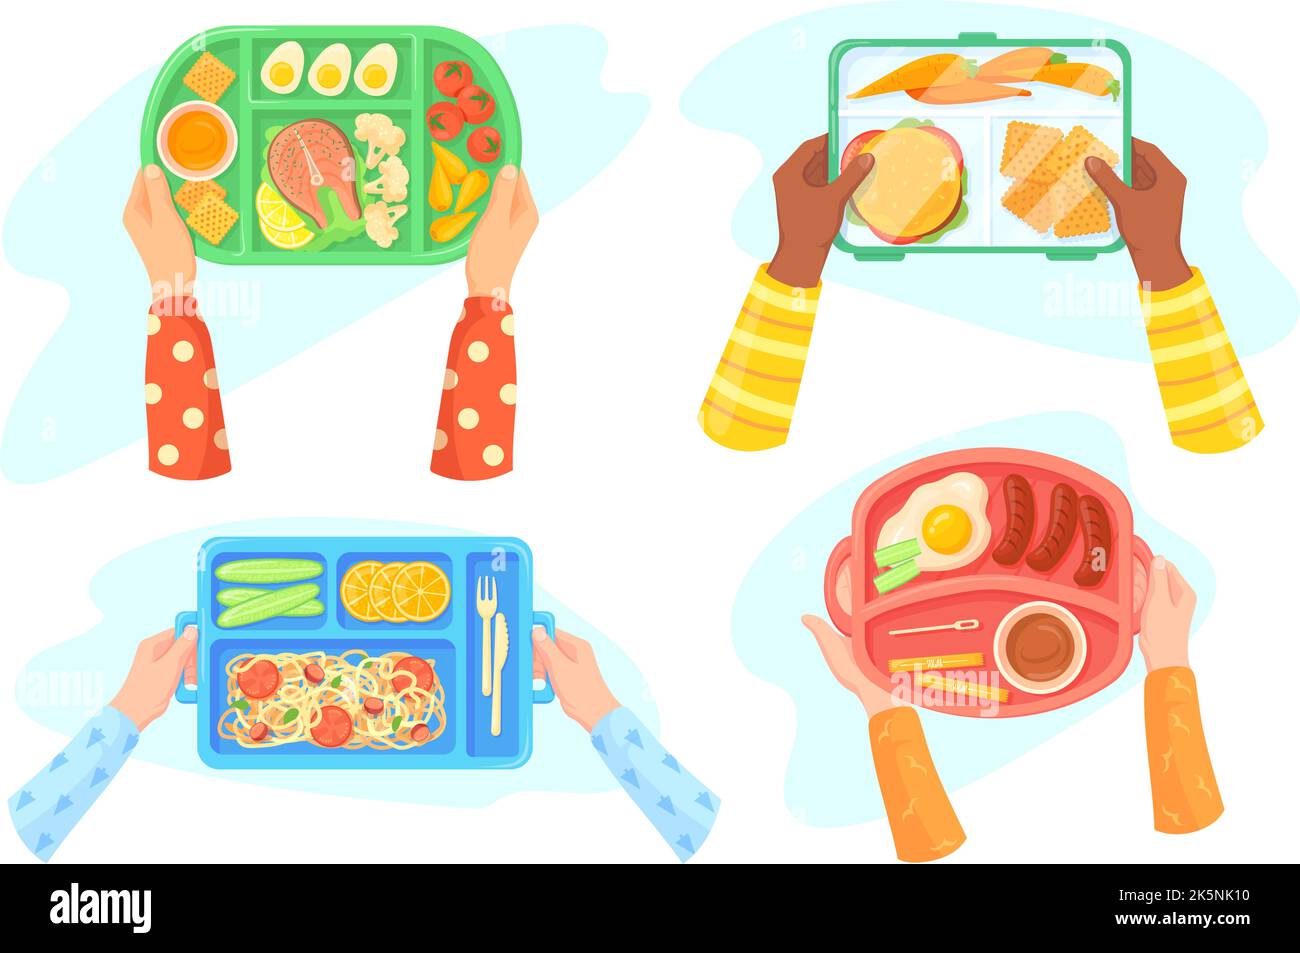 Kid lunch tray Stock Vector Images - Alamy